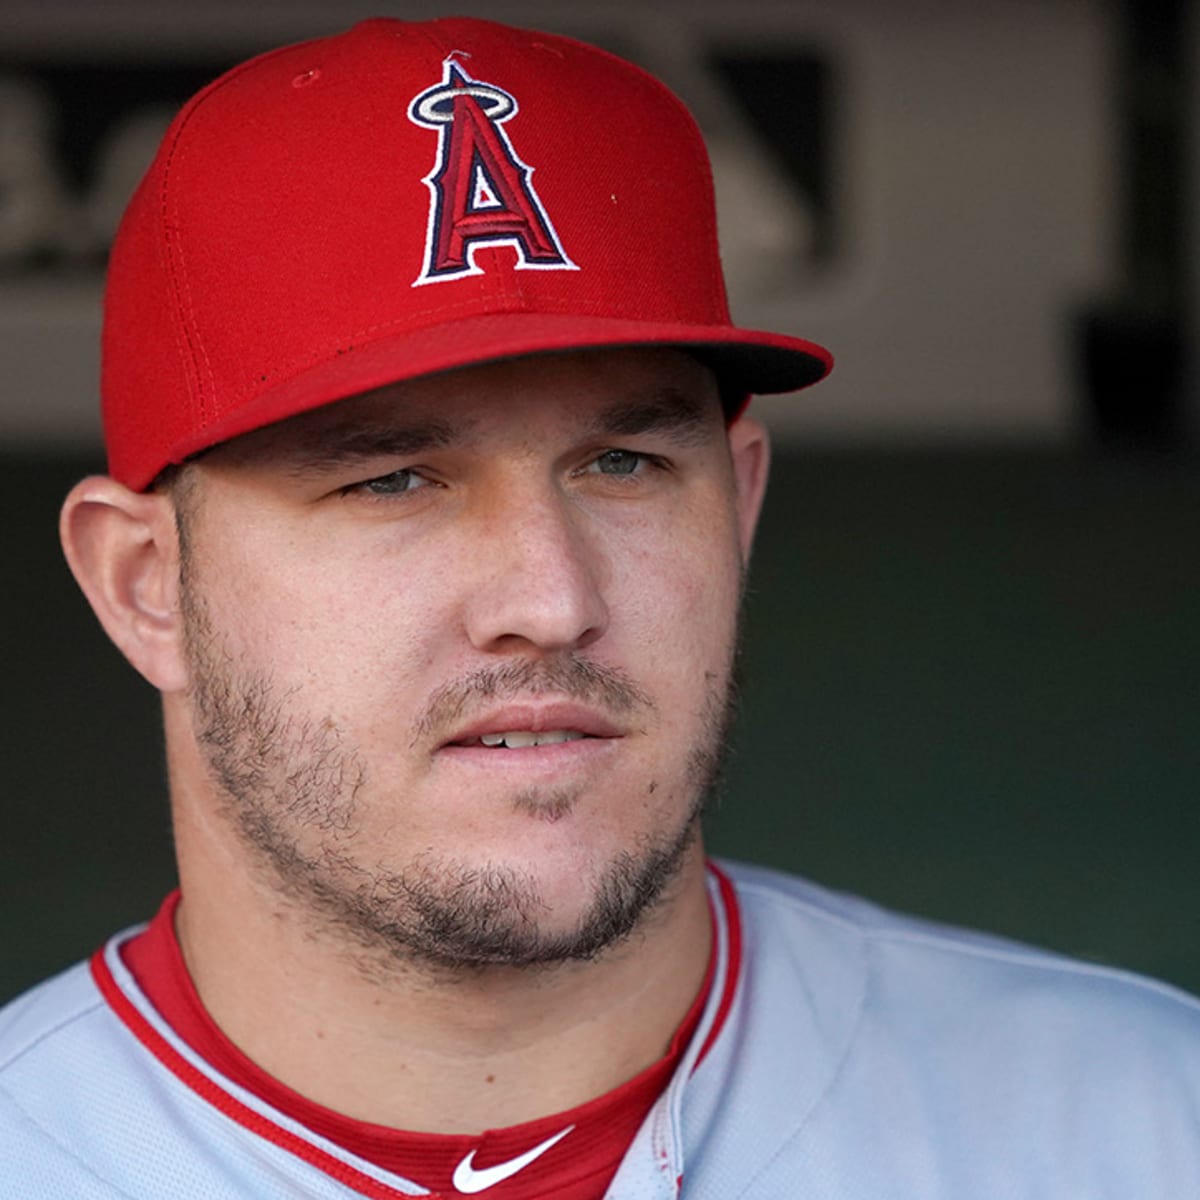 Mike Trout laments 'frustrating' injury plagued Angels season